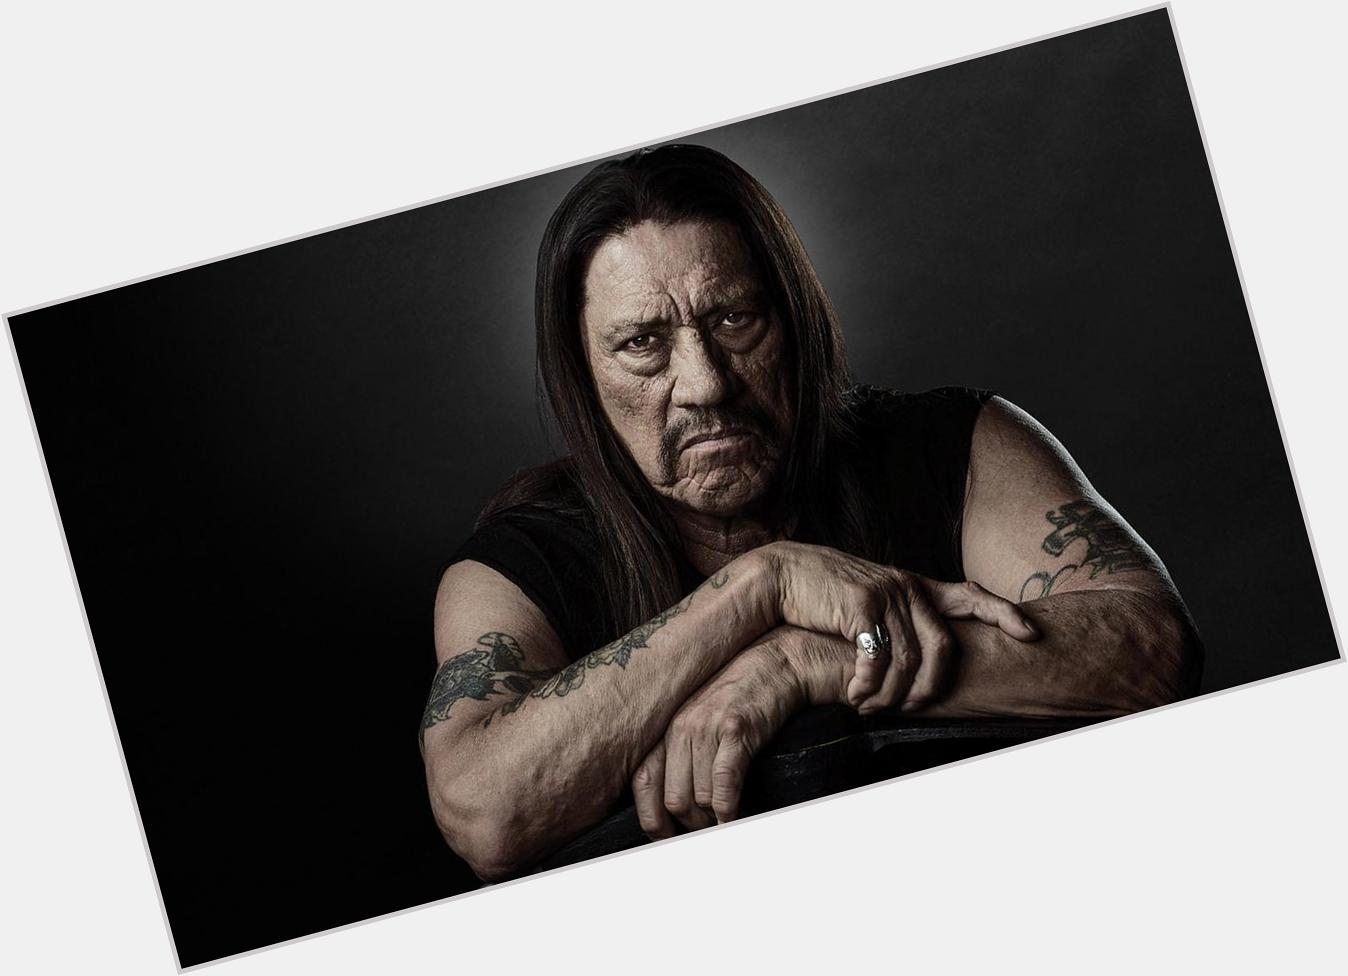 Happy Birthday goes out to Danny Trejo. One of the baddest men on the planet. Feliz Cumpleaños 